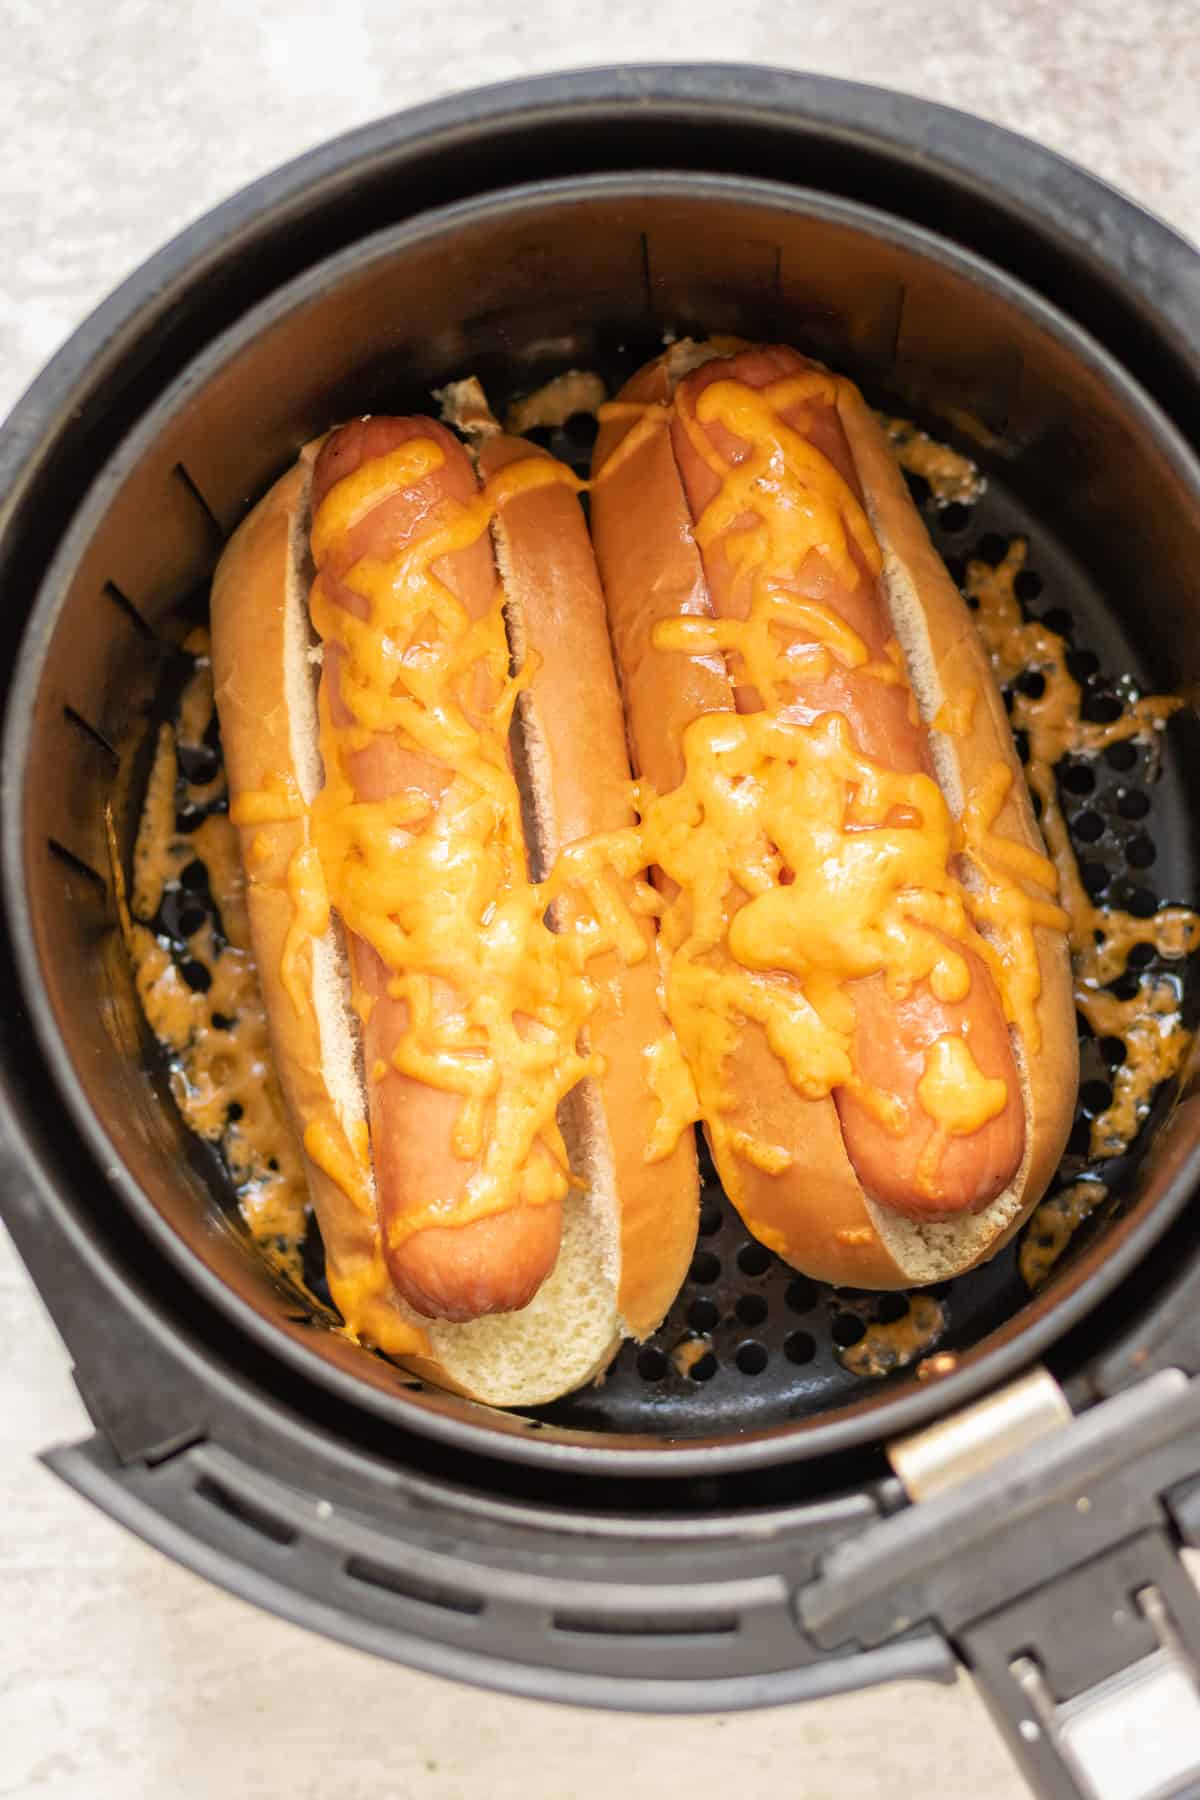 Hot dogs in buns with melted cheese in the air fryer.